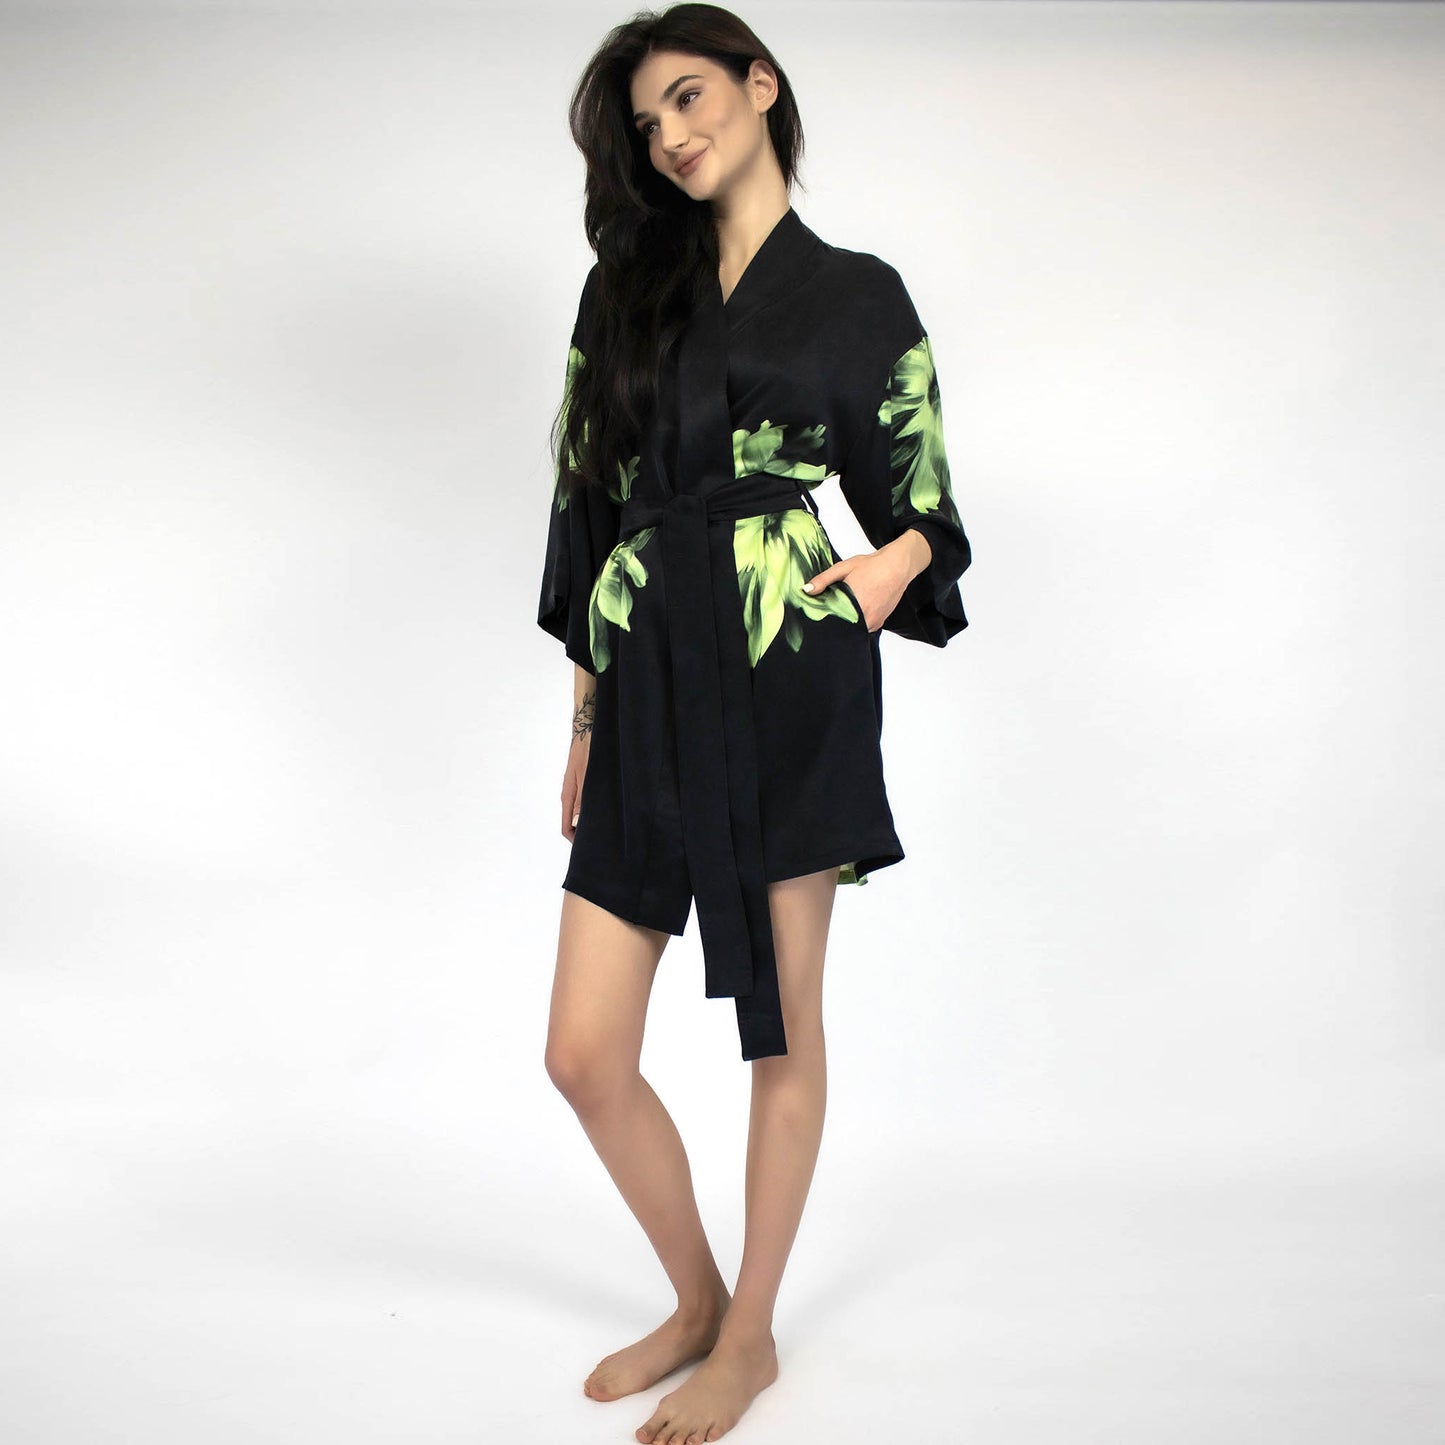 luxury silk dressing gowns in black color. great gift idea for her